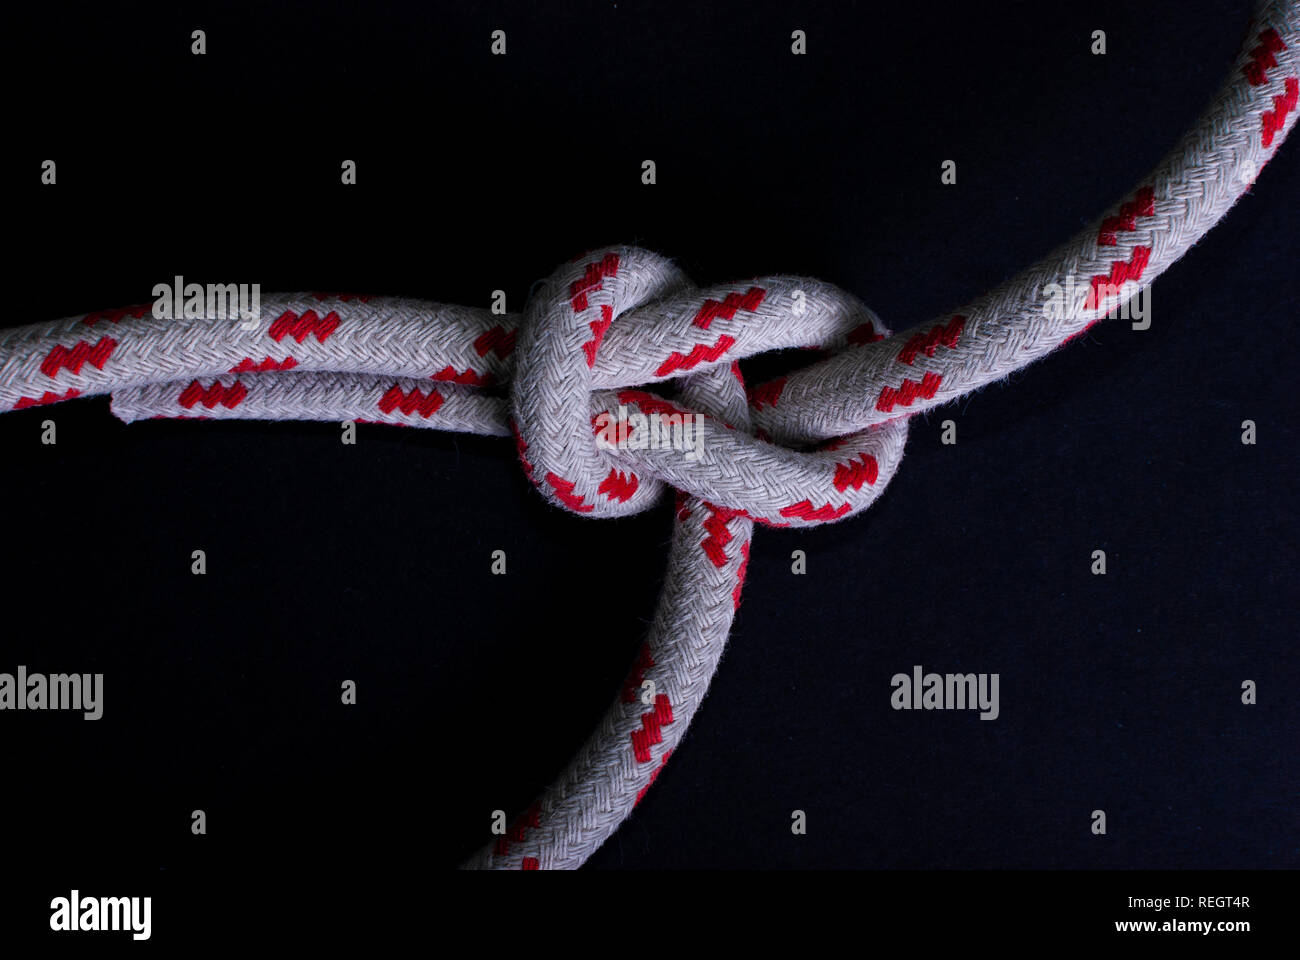 Close up of a knot in a red and white sailing rope on black background Stock Photo